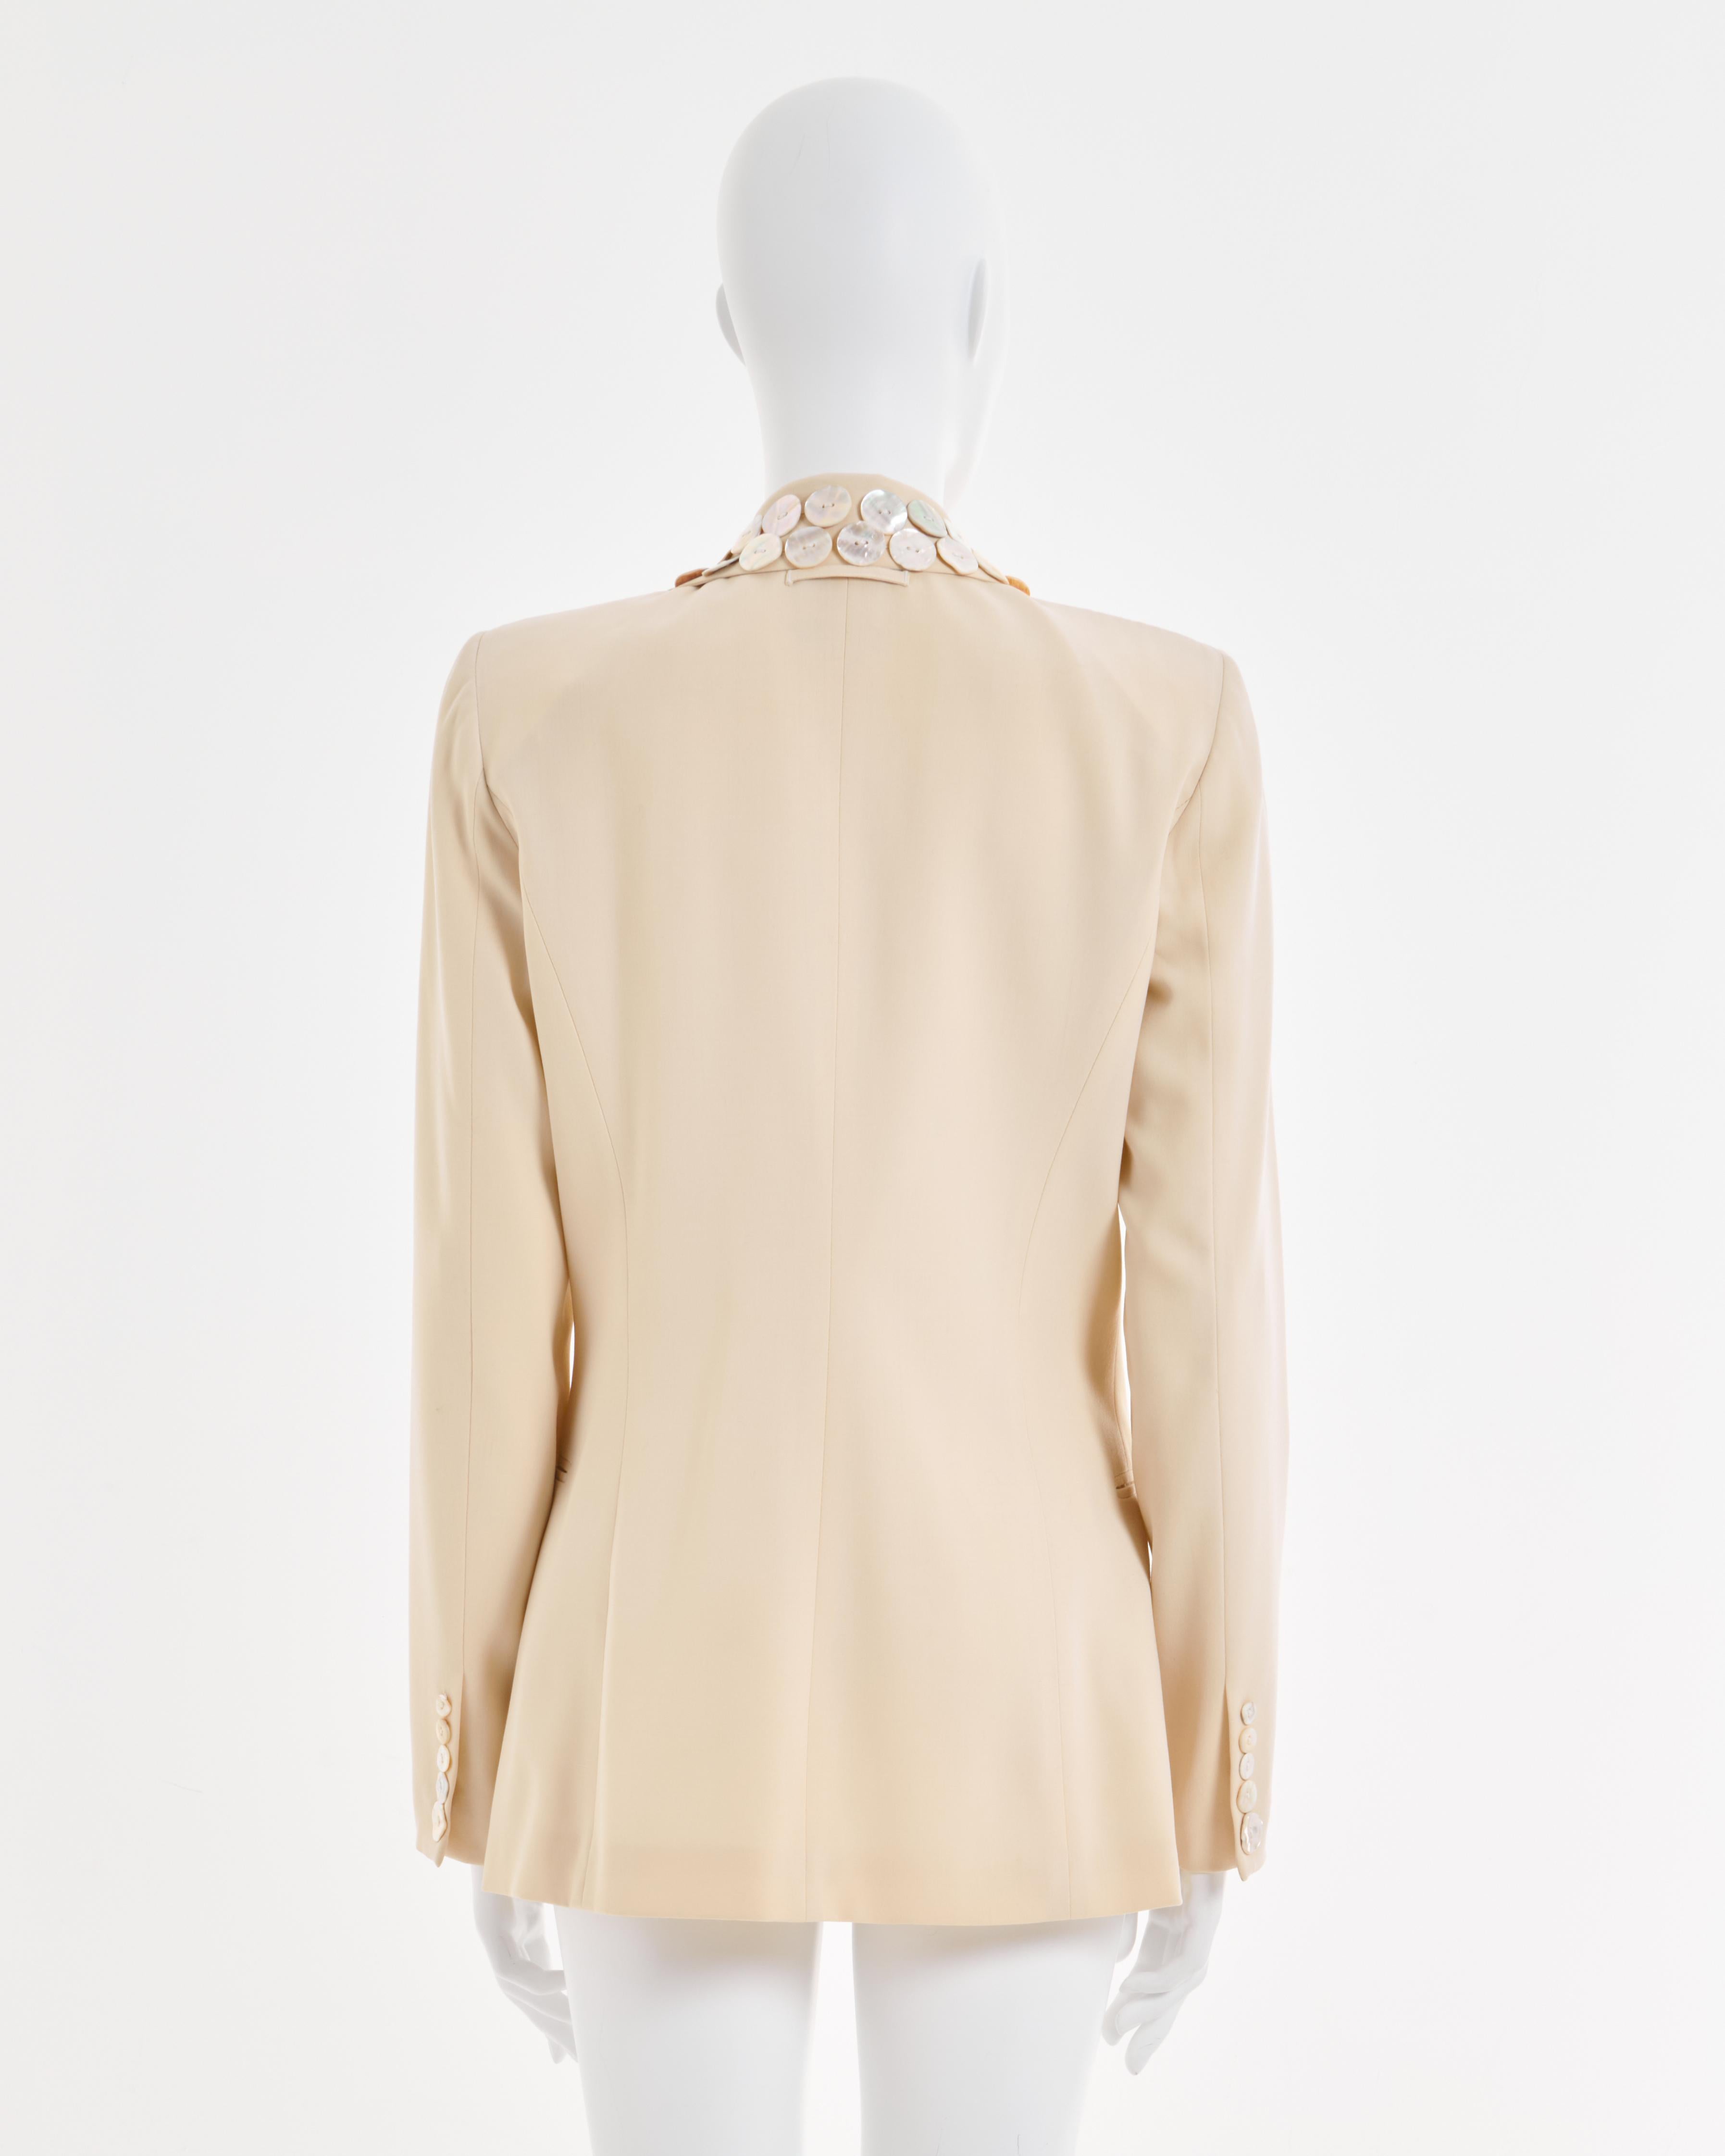 Jean Paul Gaultier Couture S/S 2003 mother of pearl button embellished jacket For Sale 2